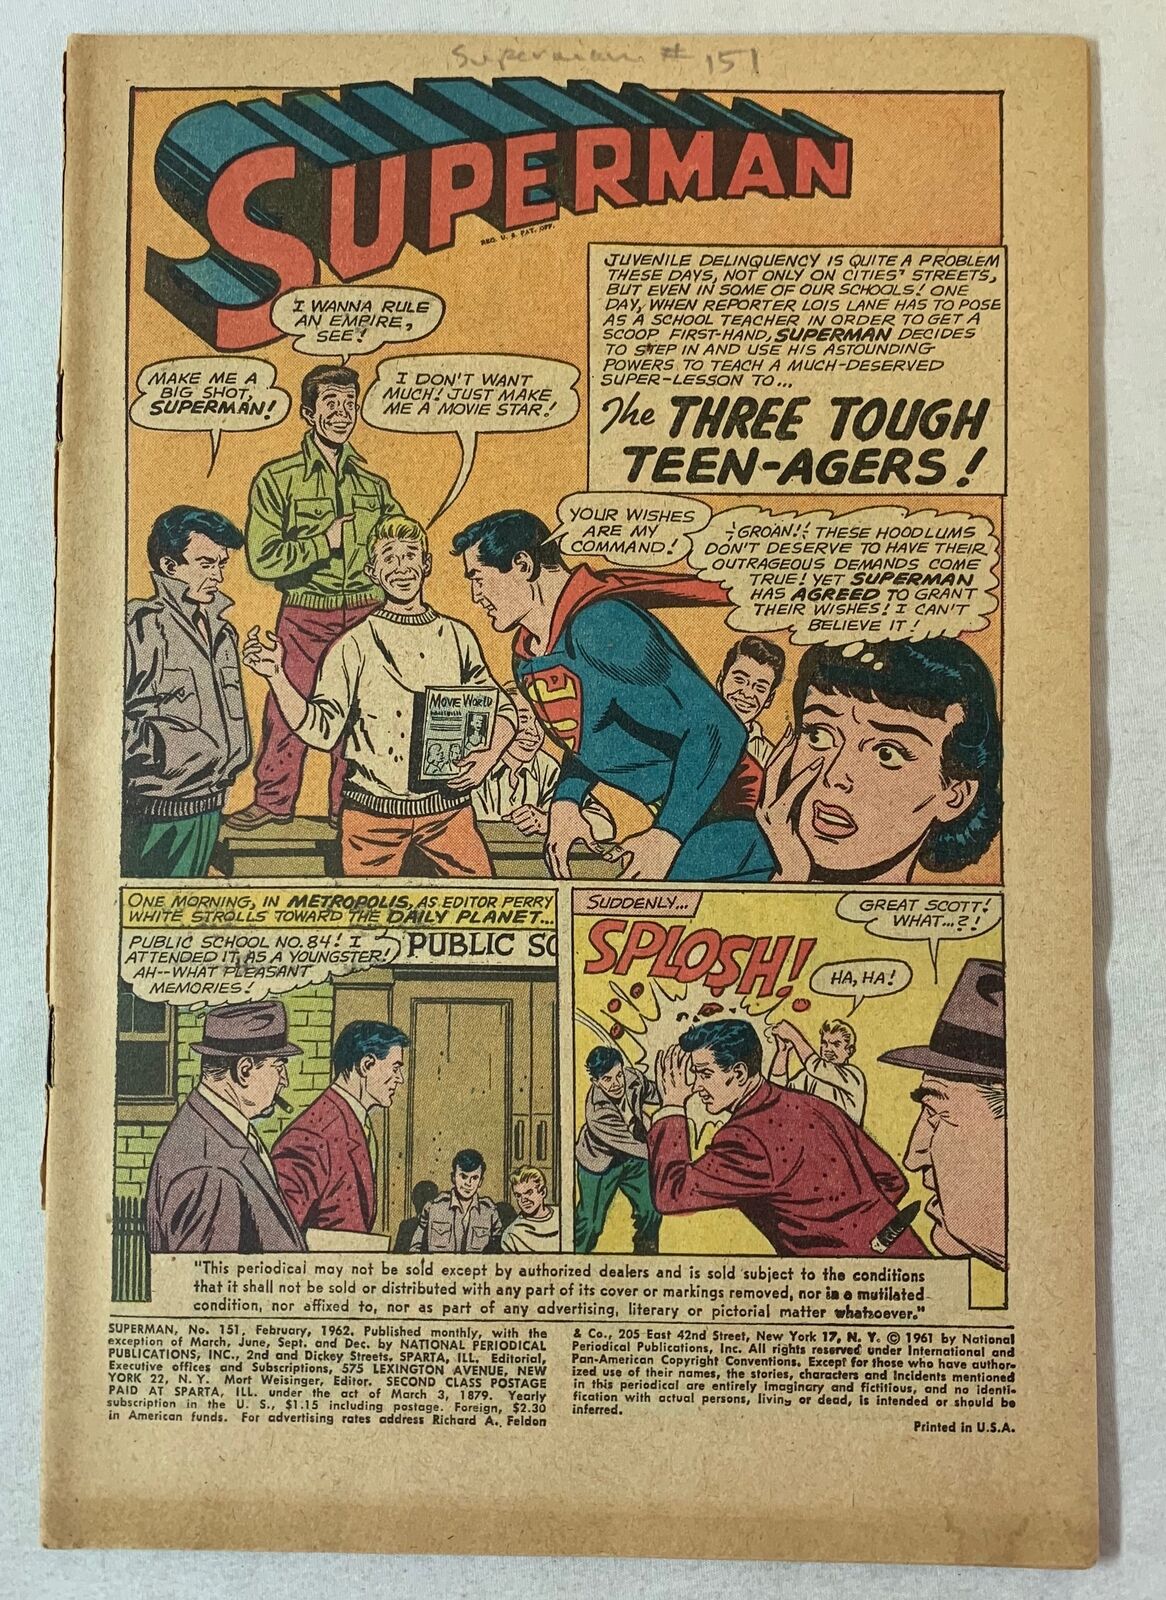 1962 SUPERMAN #151 ~ missing front cover